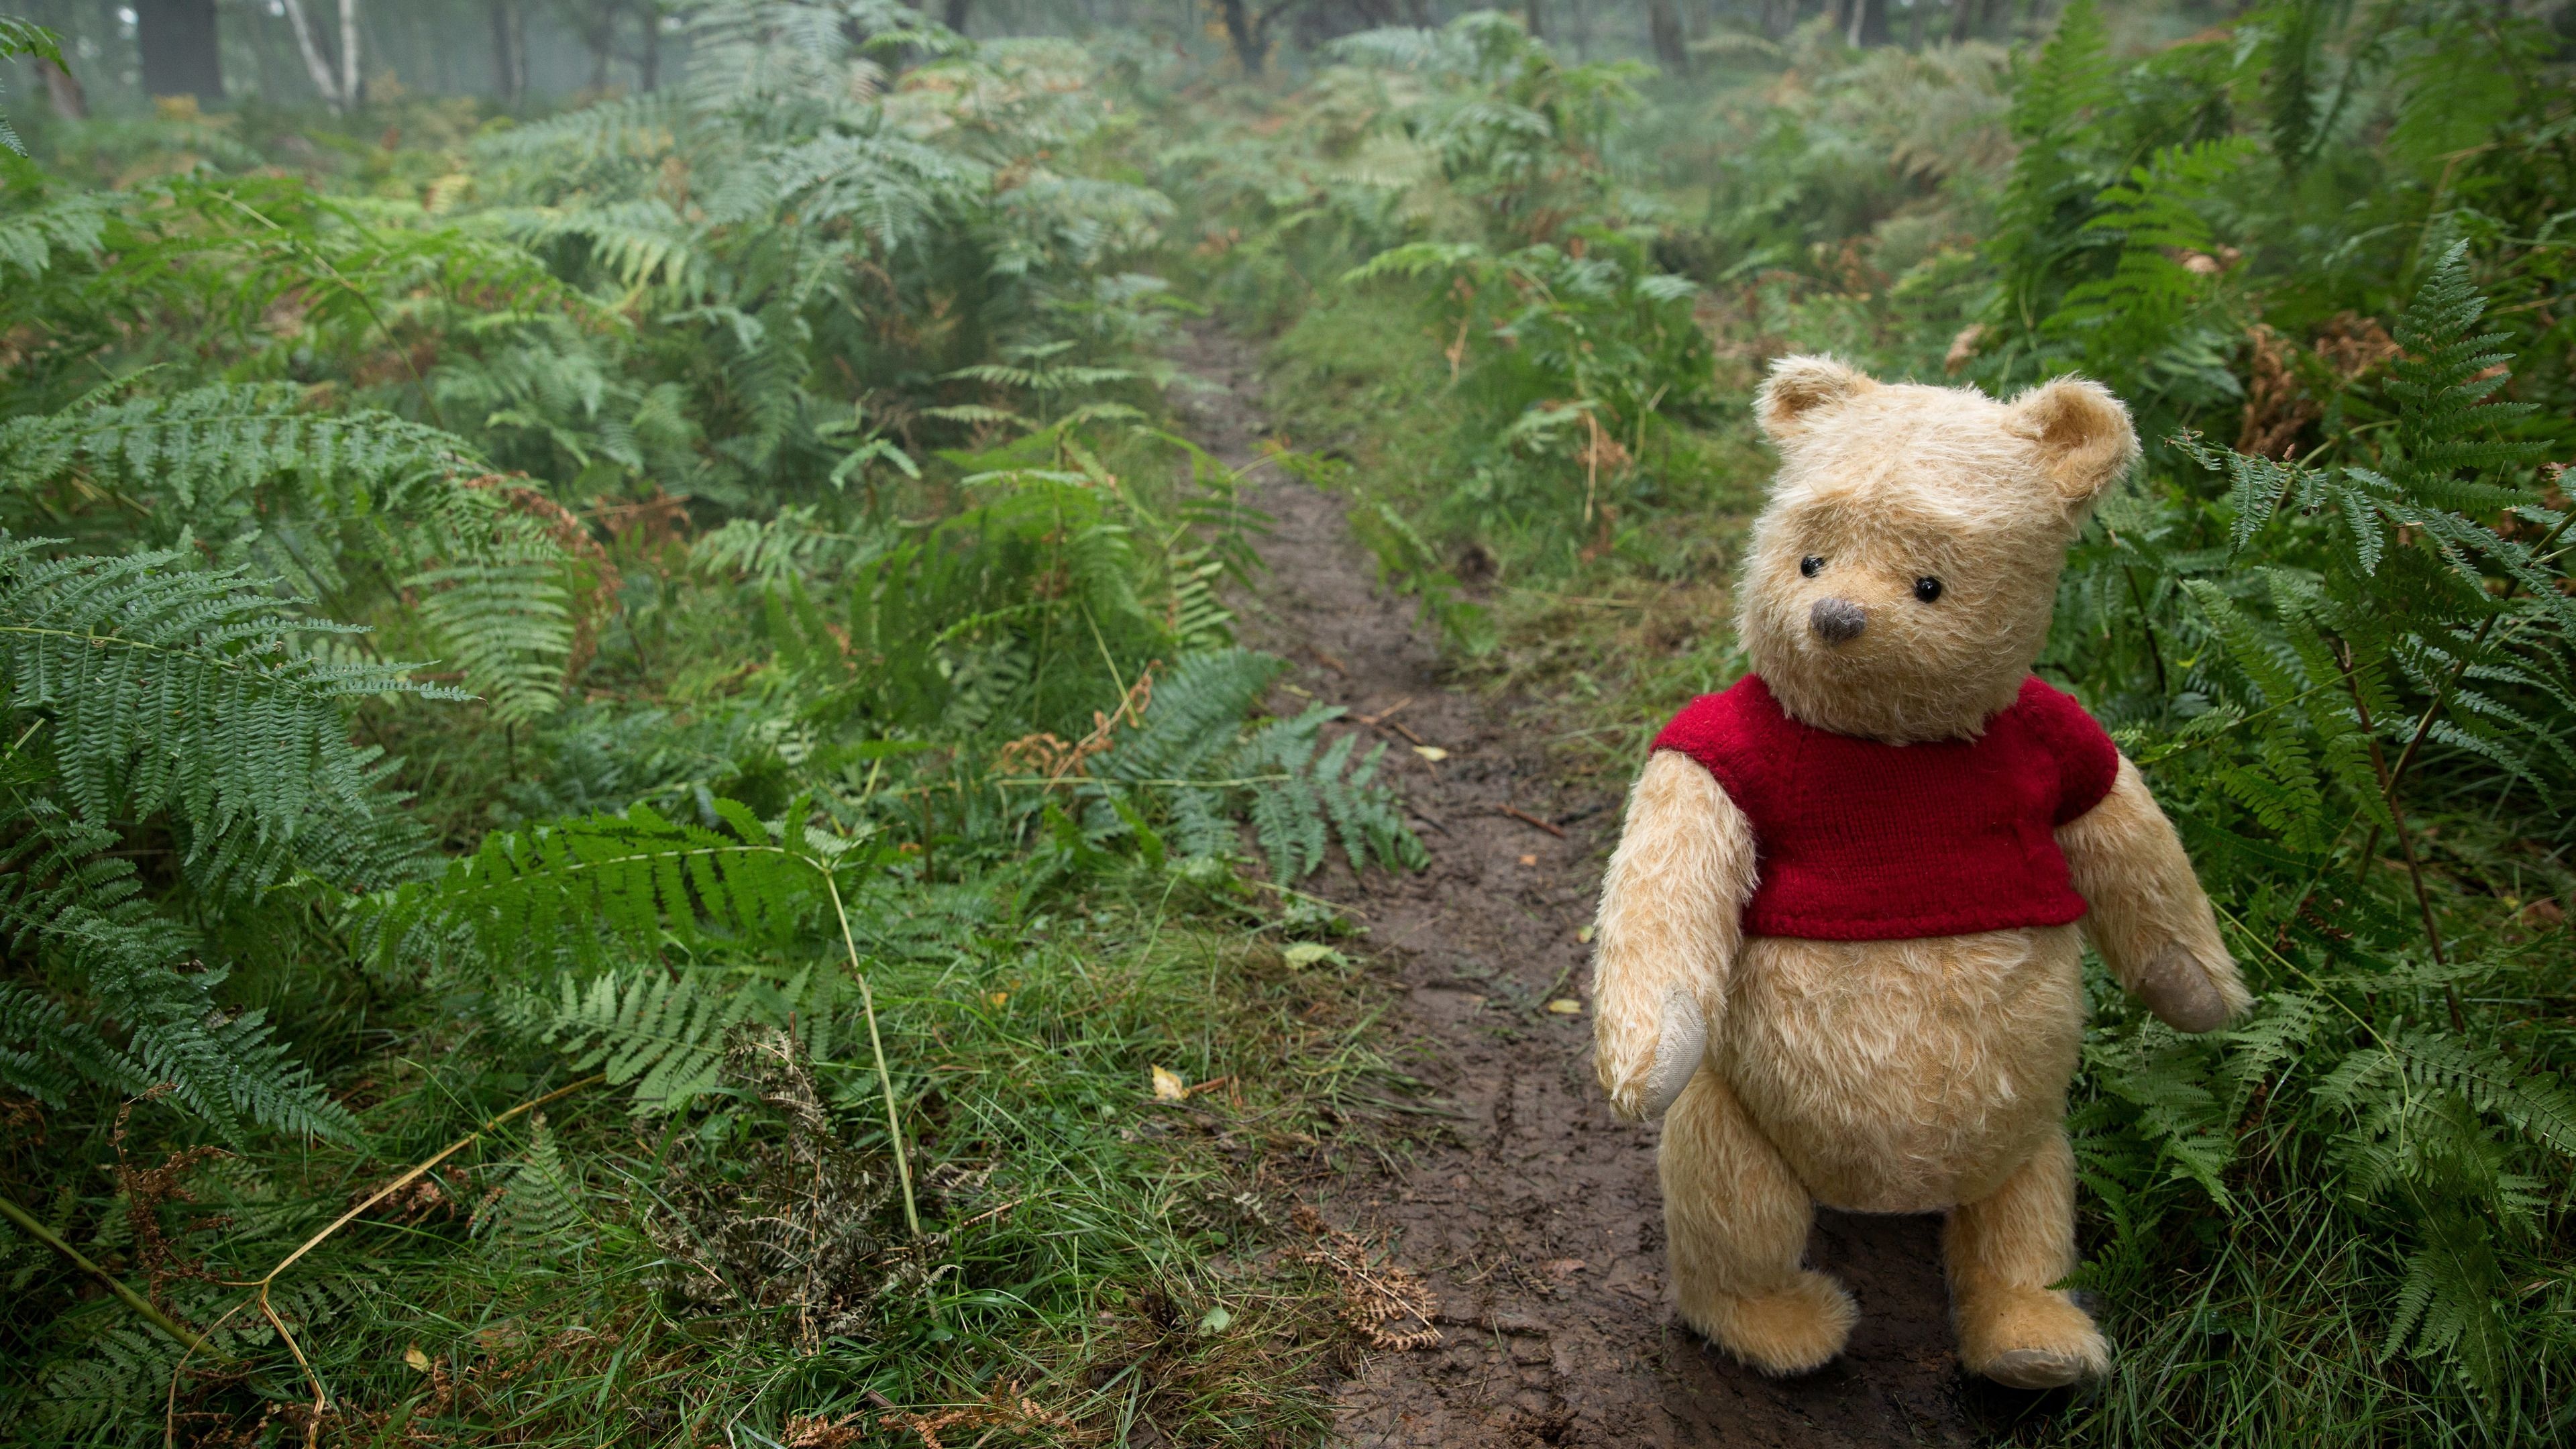 Christopher Robin (Movie): Winnie the Pooh, a honey-loving teddy bear who lives in the Hundred Acre Wood. 3840x2160 4K Wallpaper.